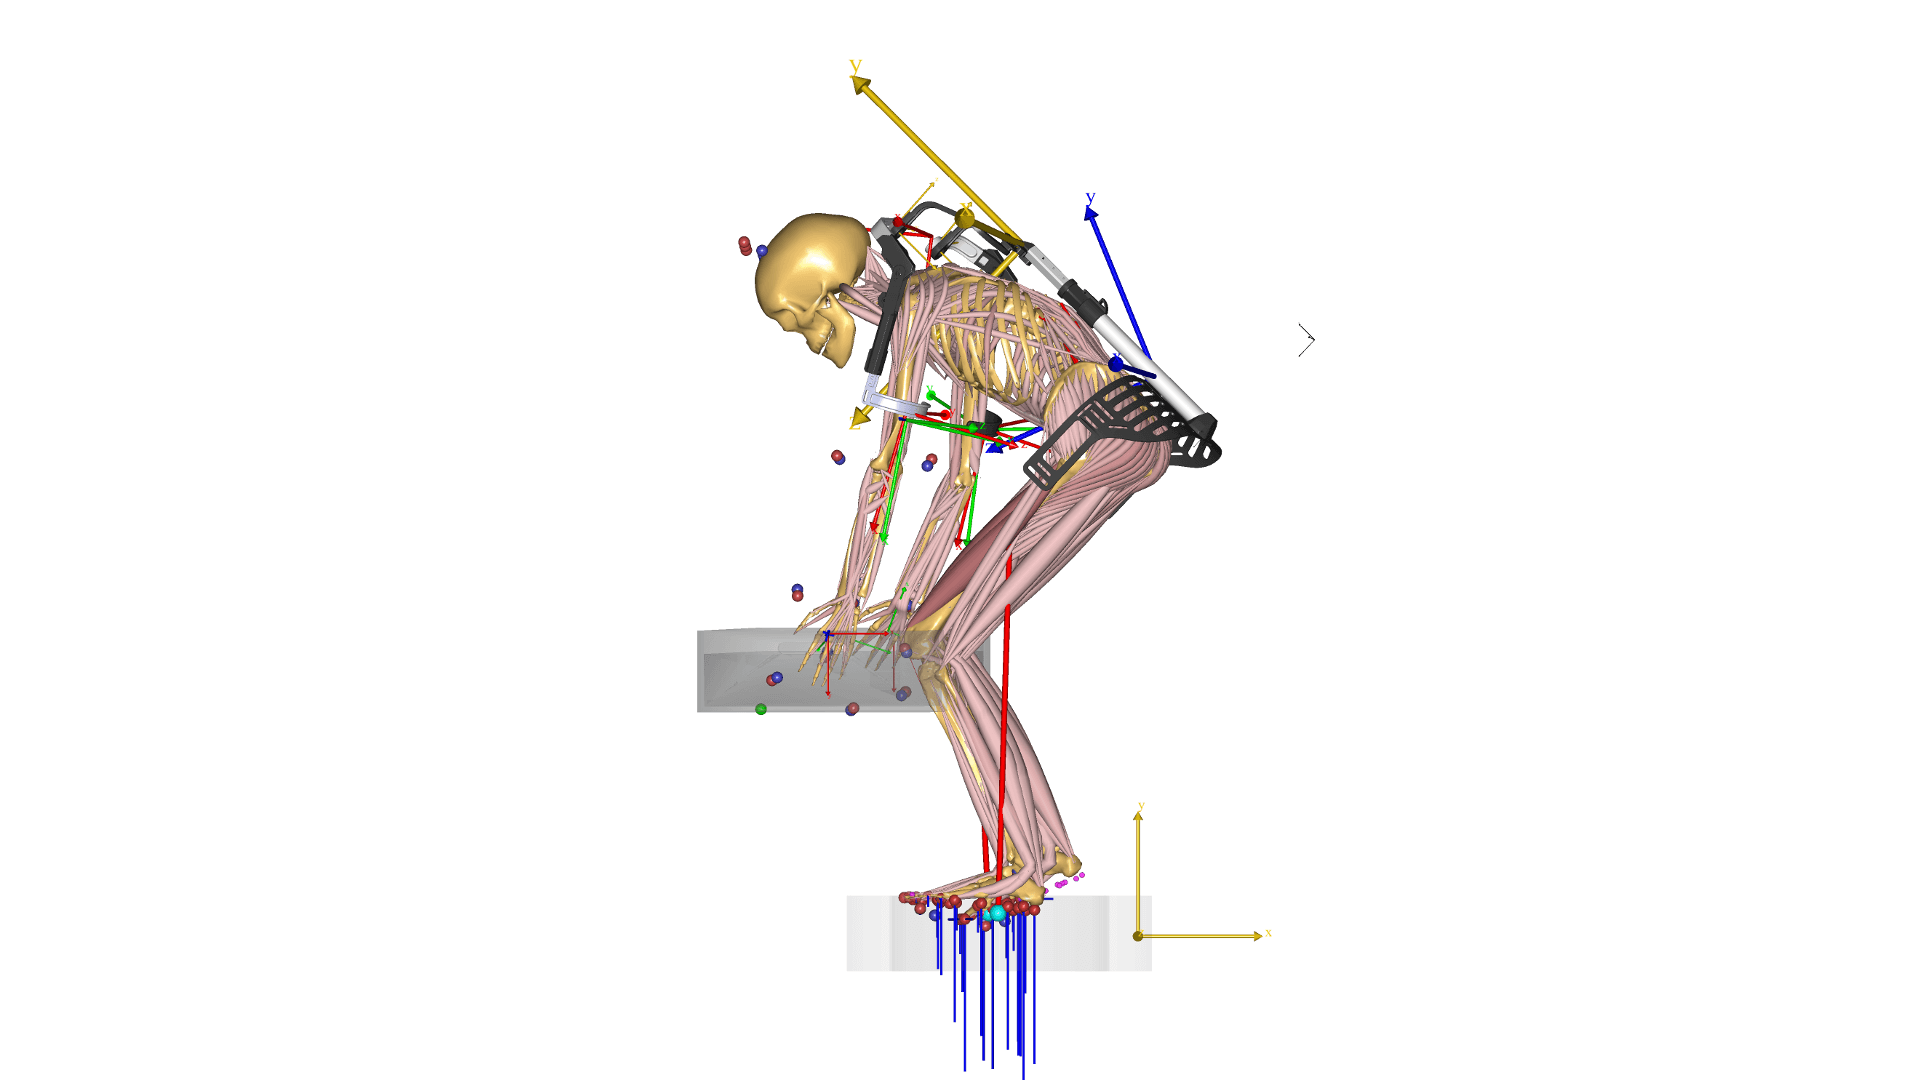 Biomechanical investigation of a passive upper extremity exoskeleton for manual material handling – A computational parameter study